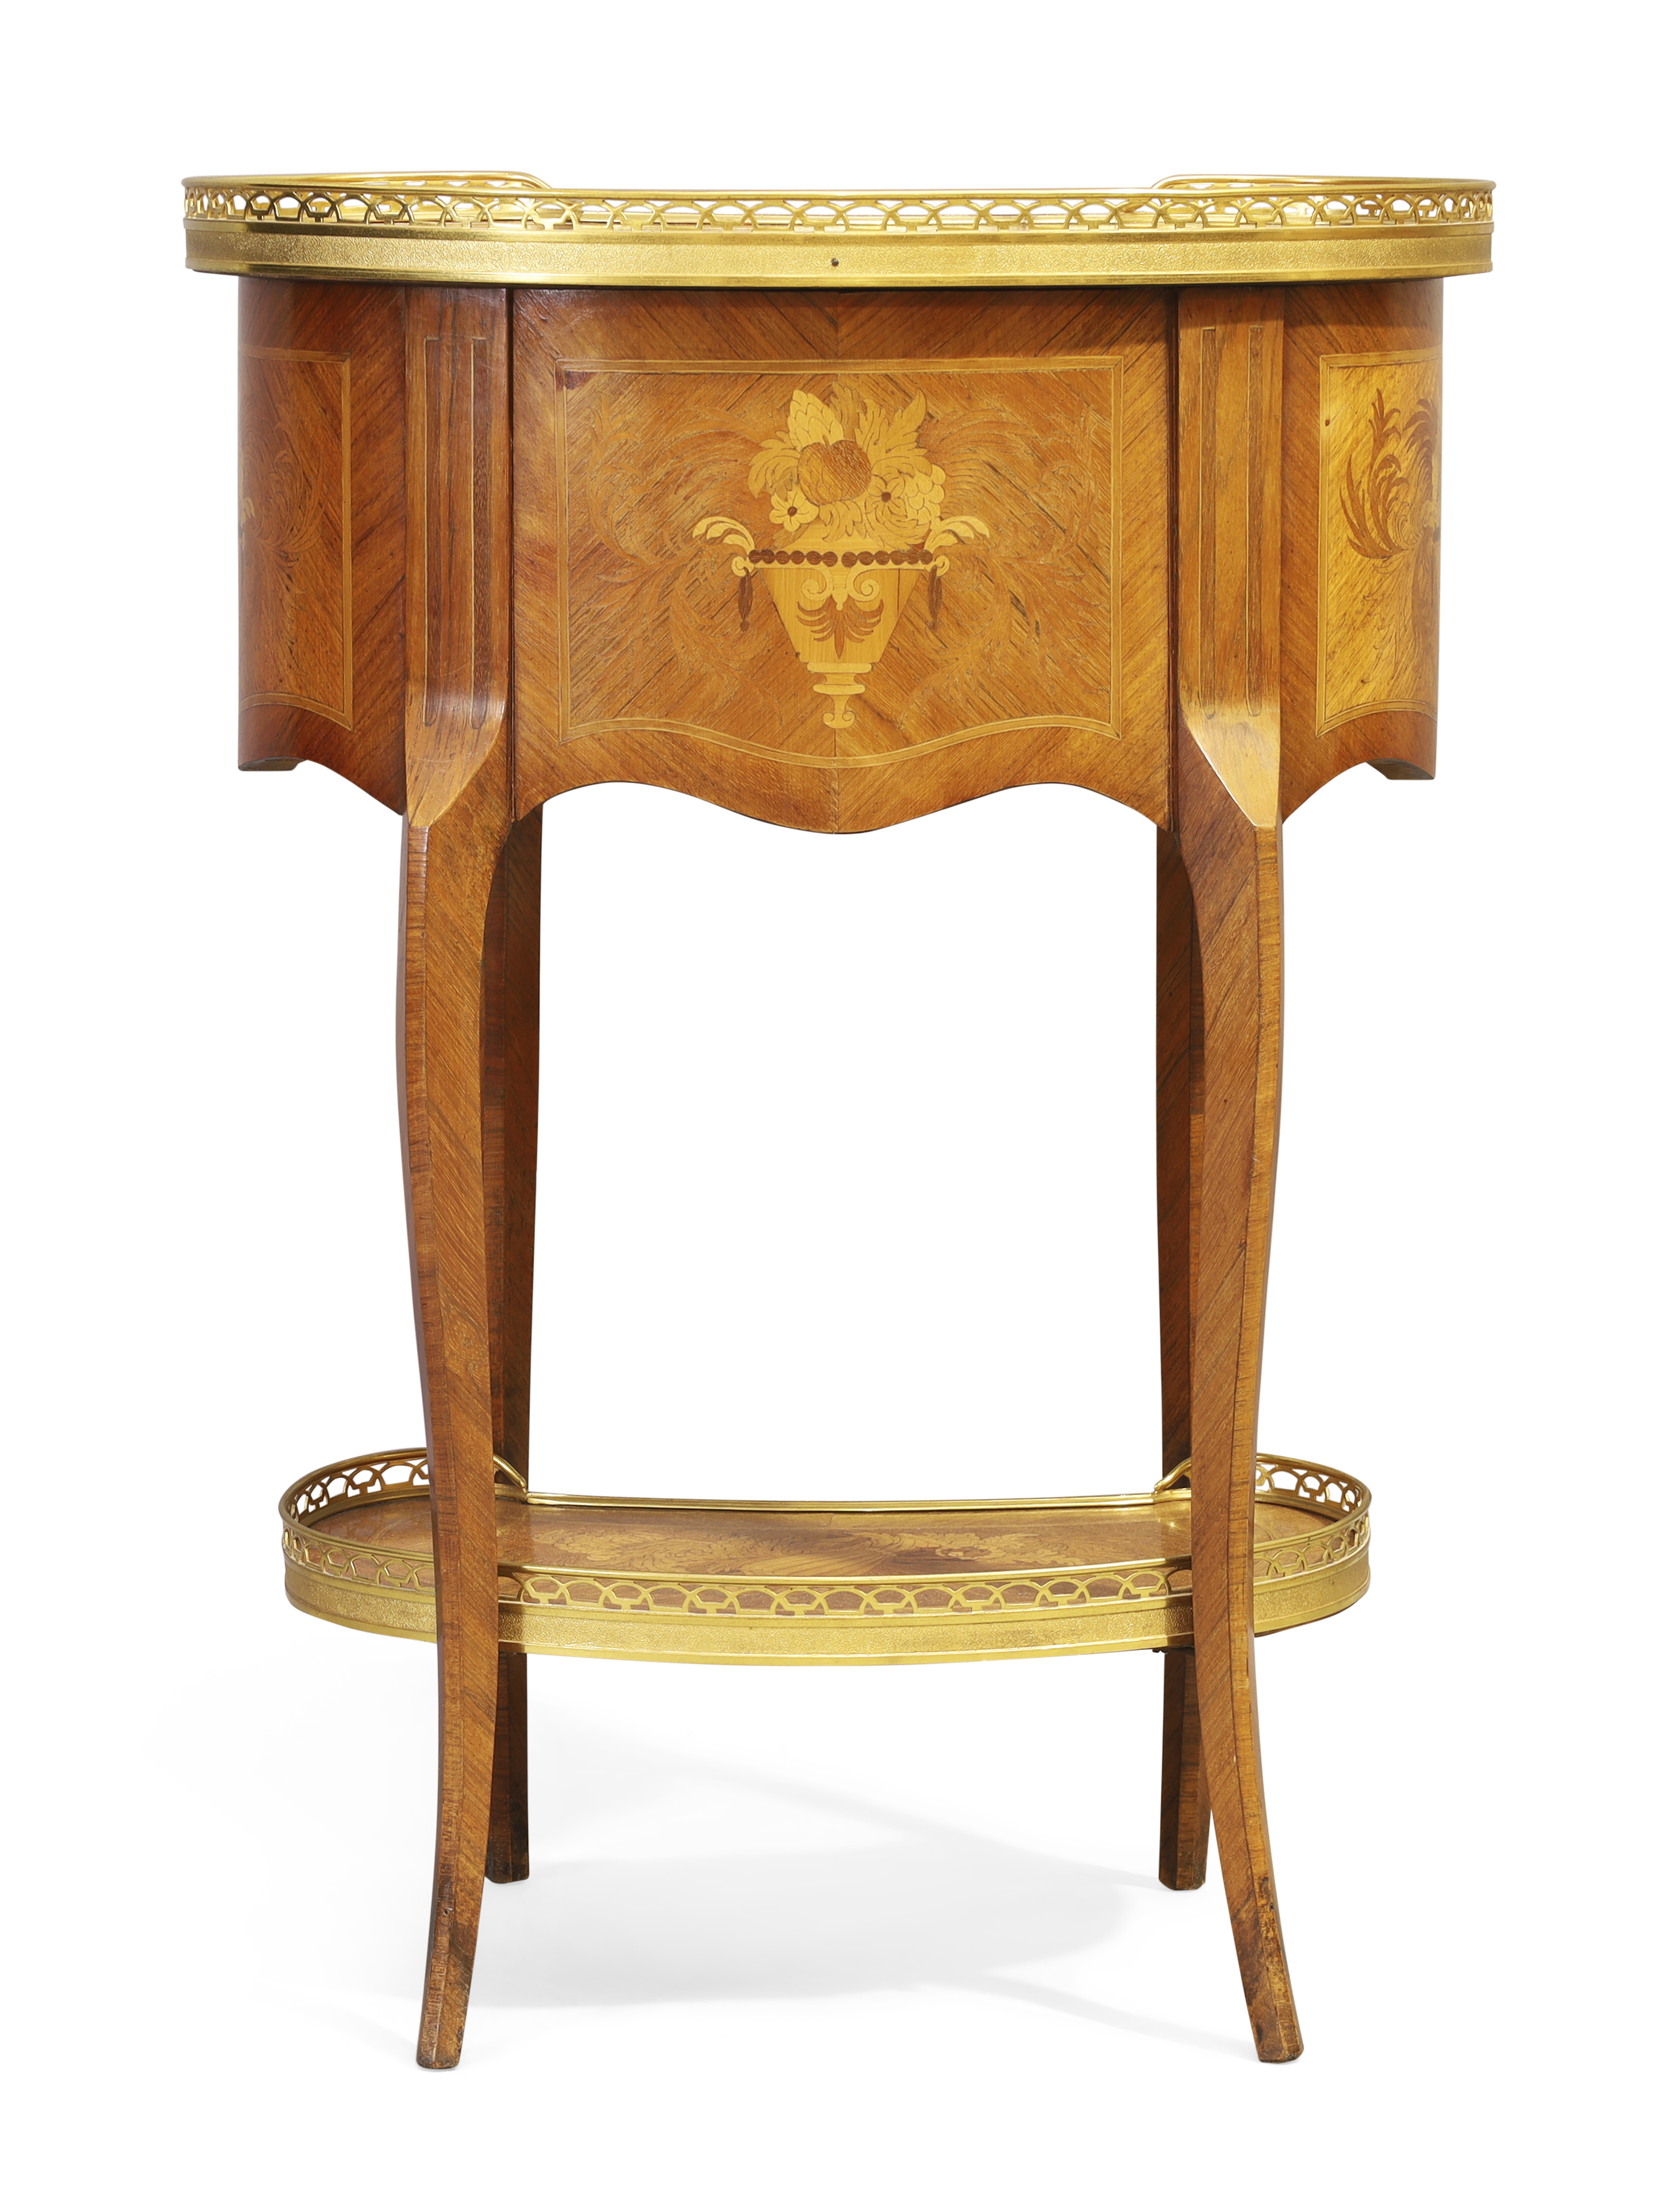 A French kingwood and marquetry inlaid kidney shape side table, In the manner of Charles Topino, ... - Image 4 of 4